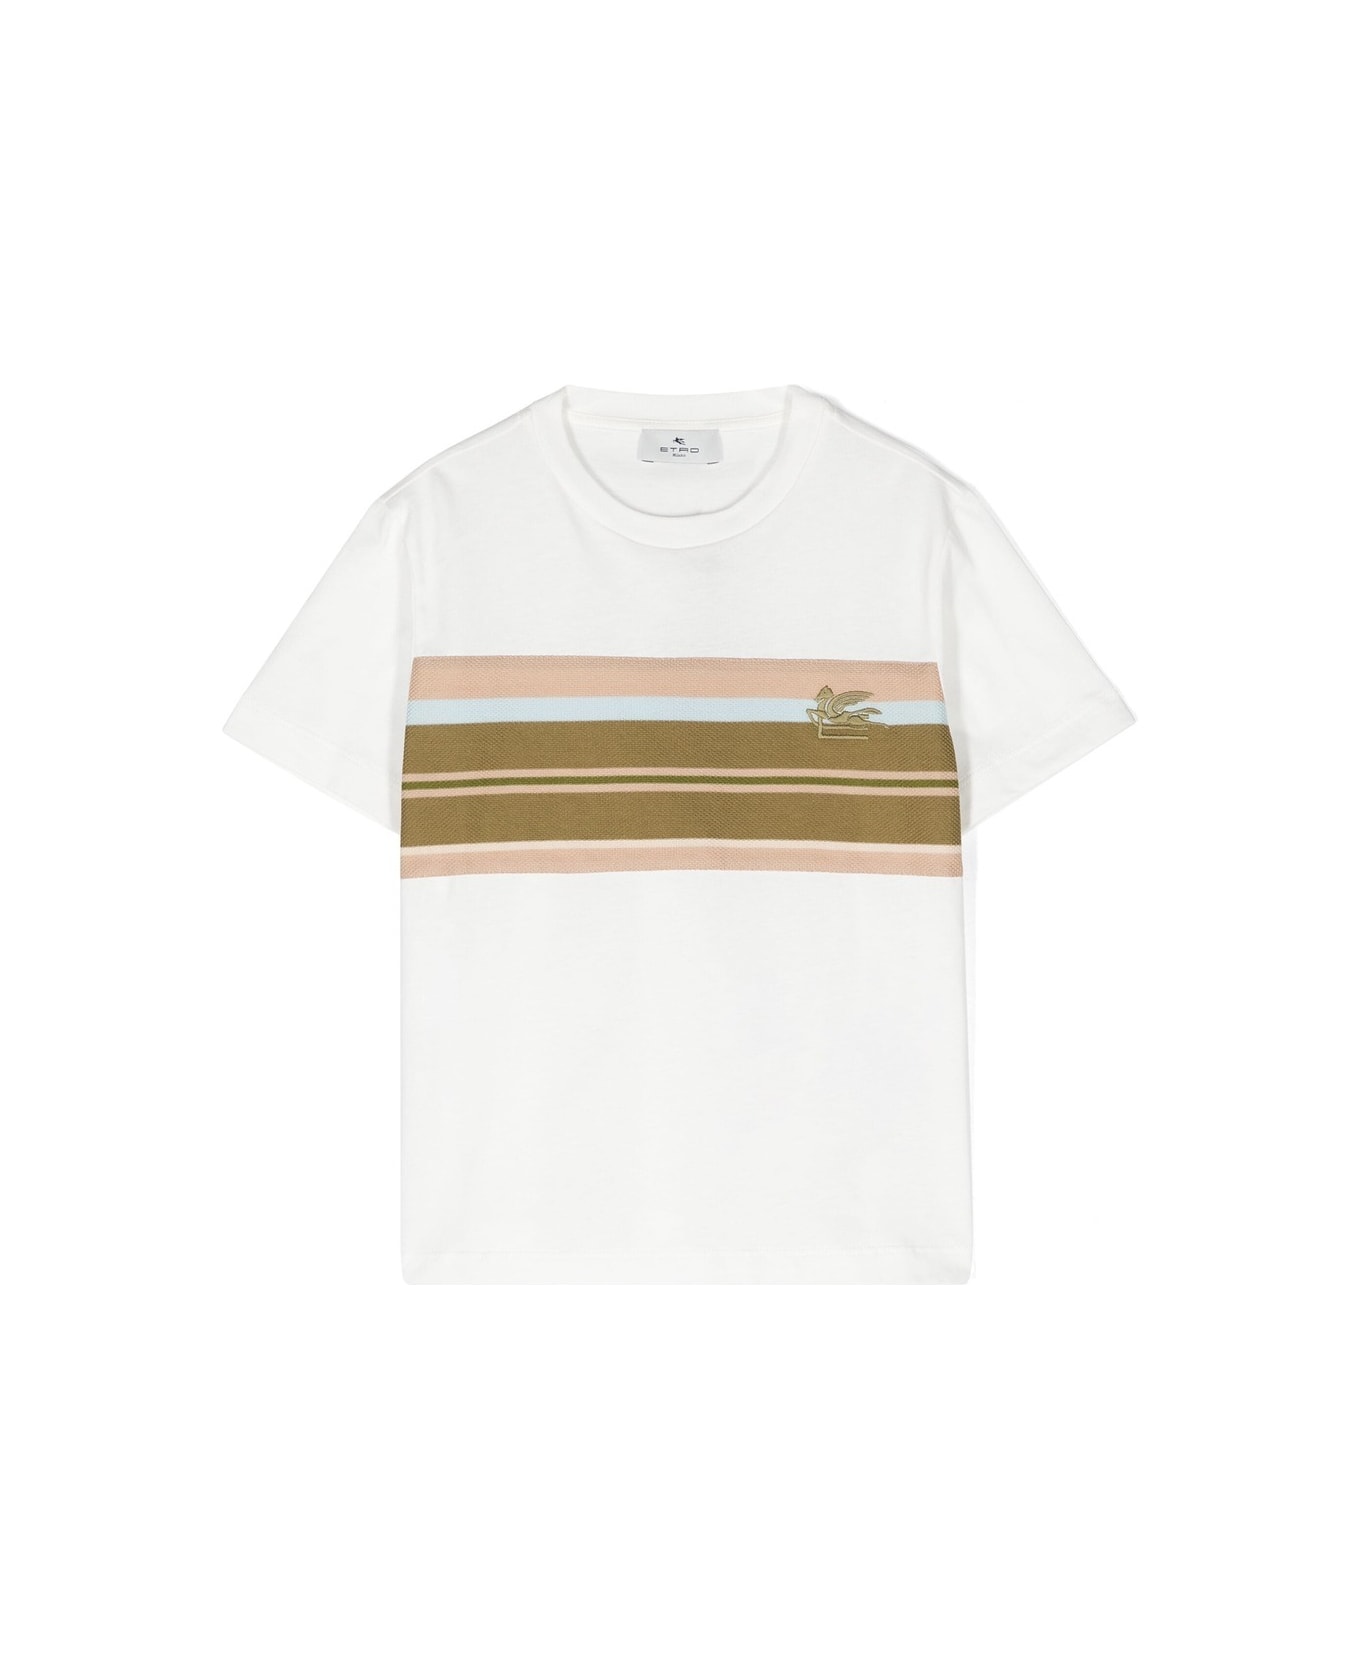 Etro White T-shirt With Logo And Striped Insert - Green